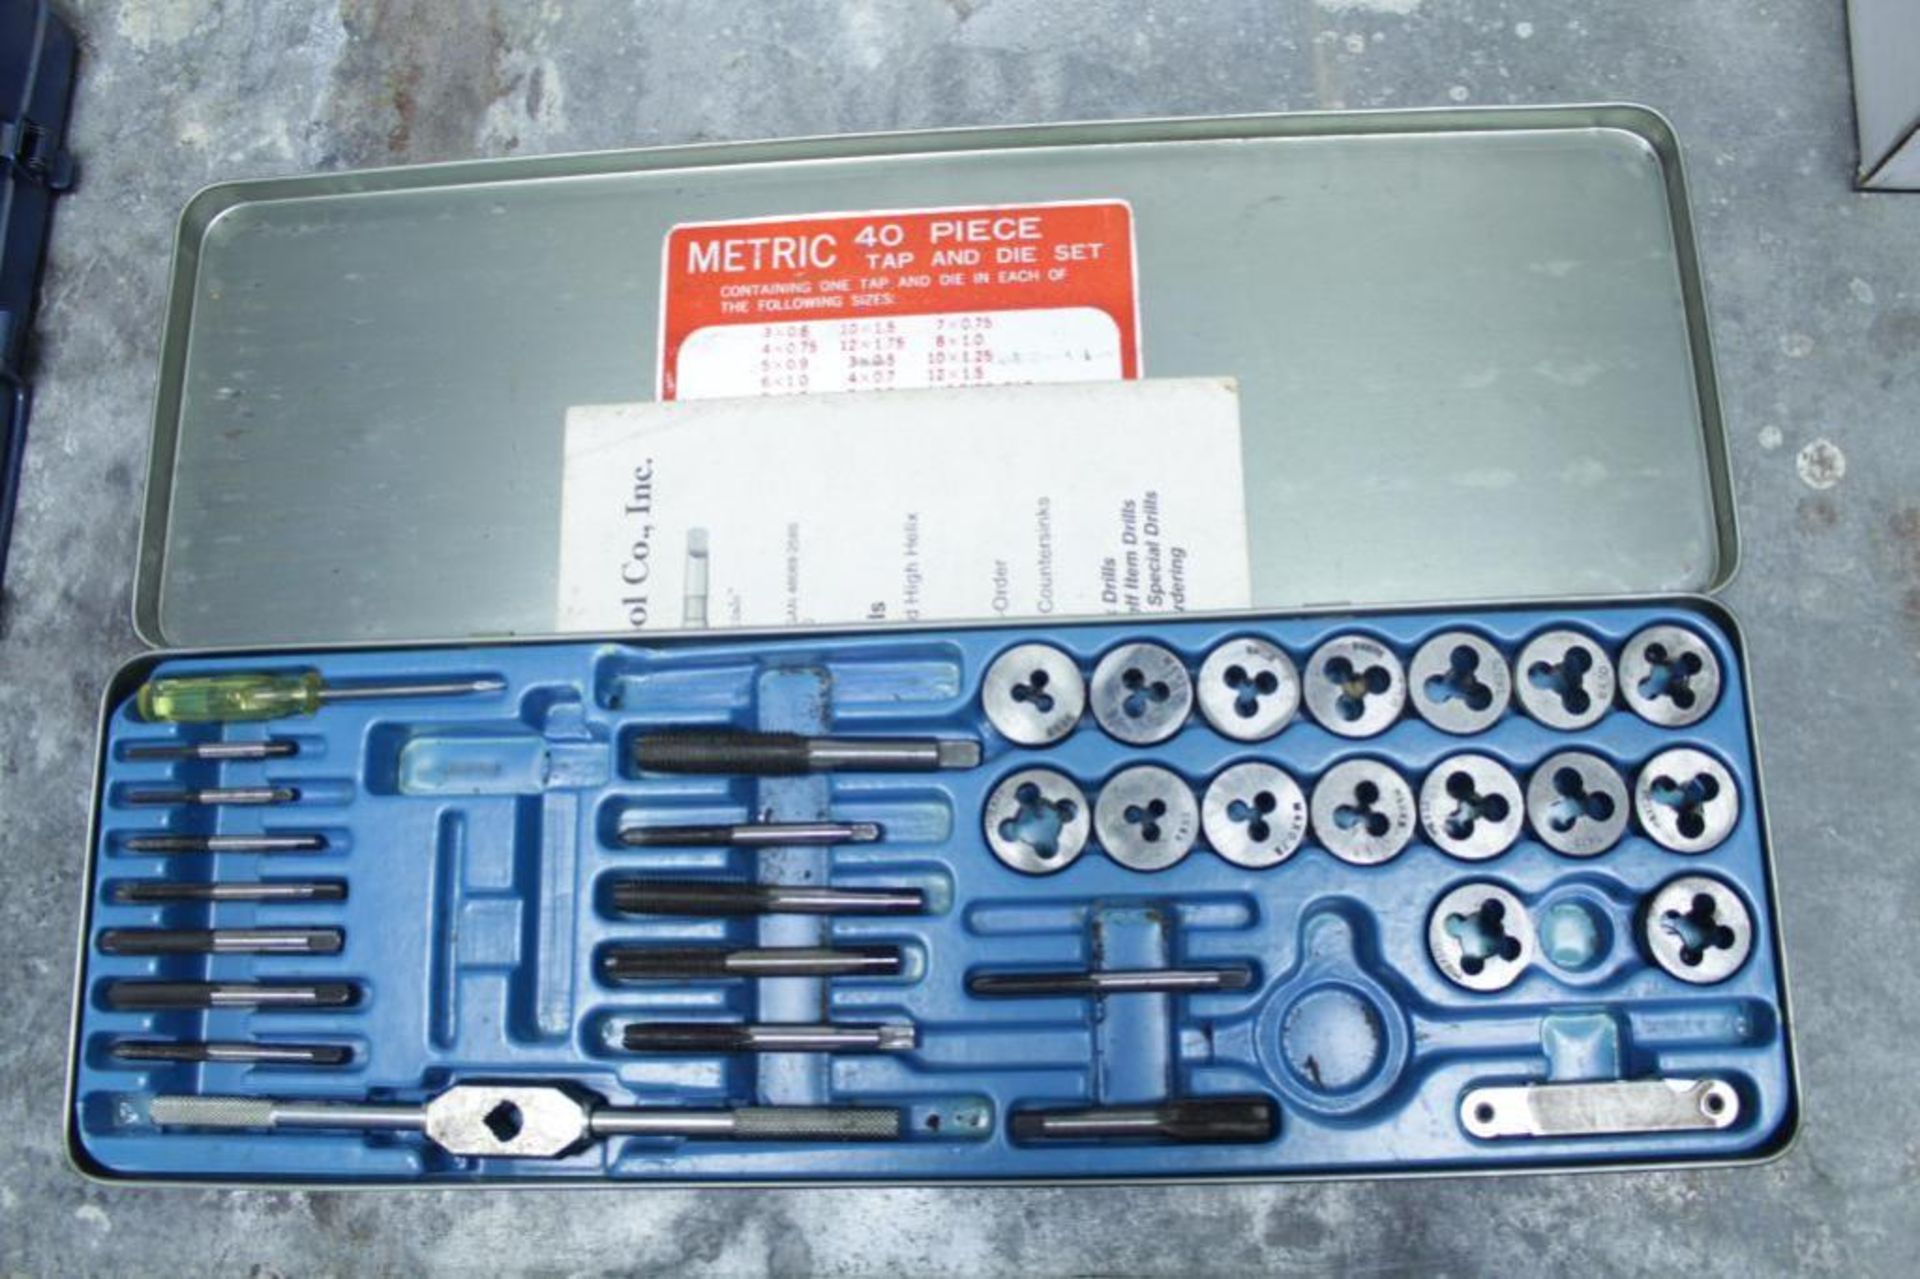 English and metric tap & die sets - Image 4 of 4